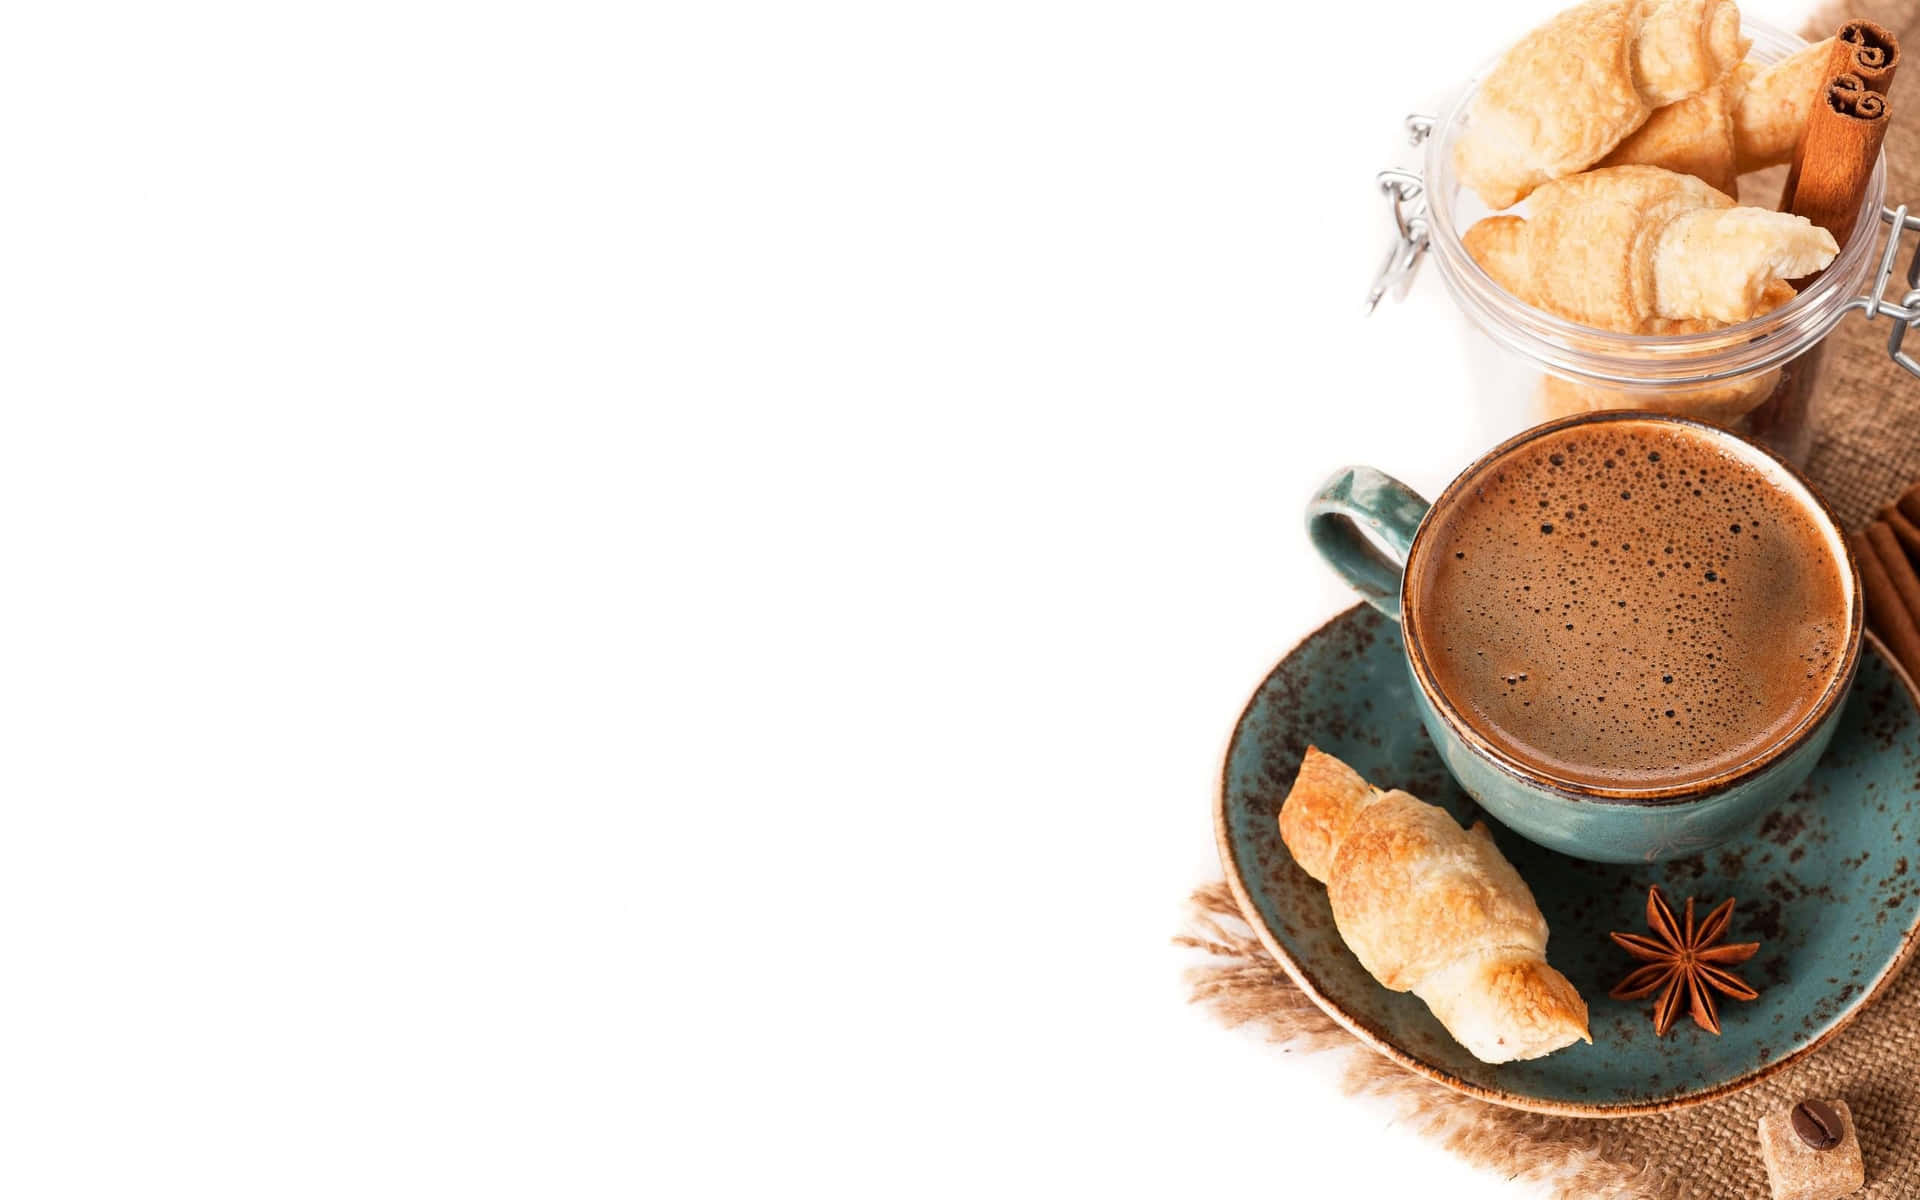 tea, breakfast and brown background - image #7696189 on